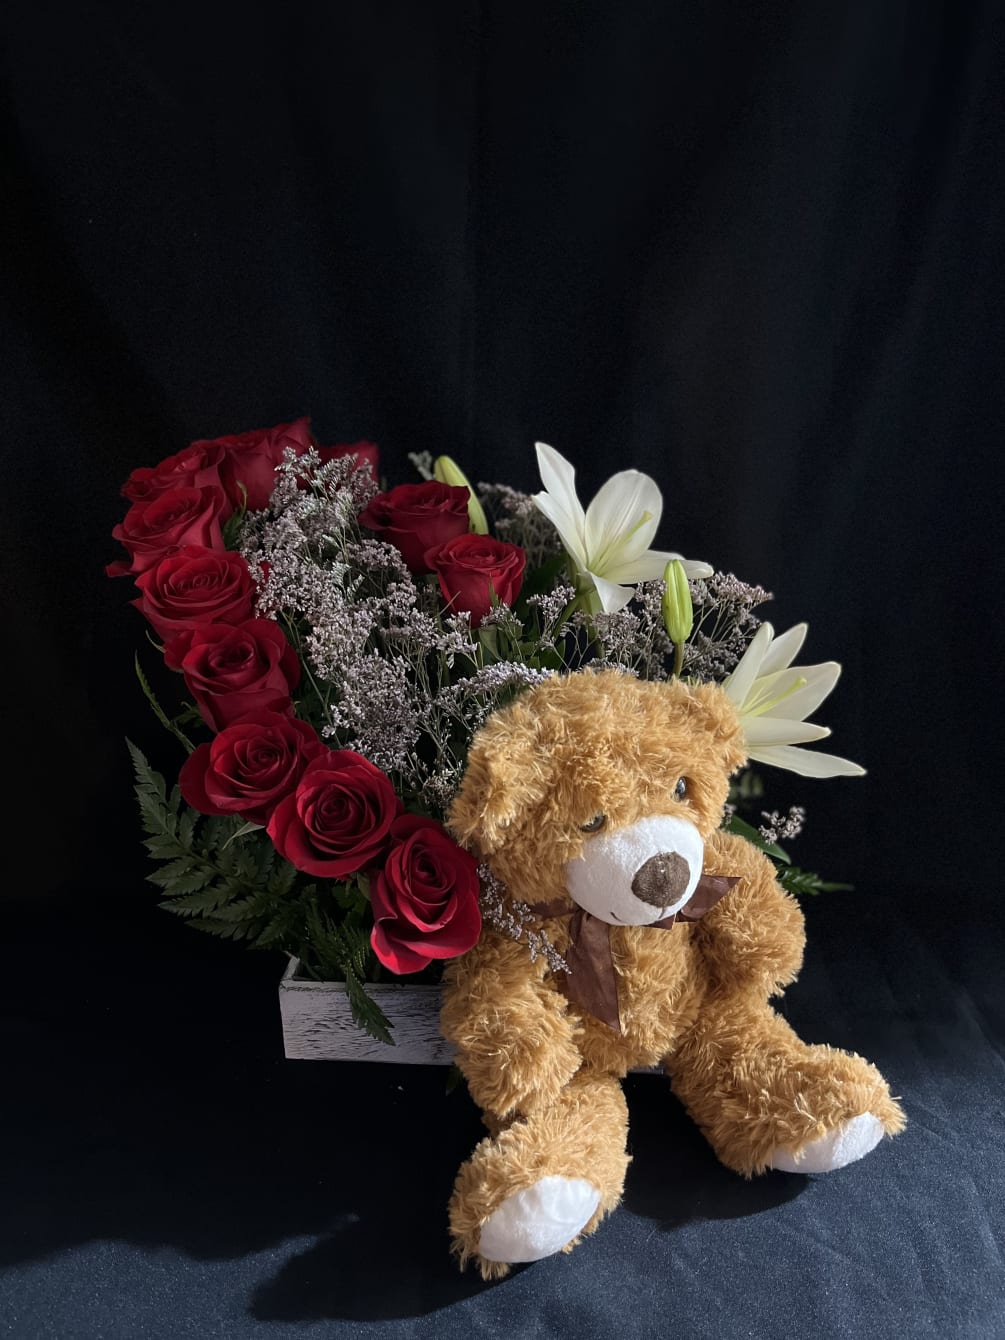 A dozen roses, lilies, with limonium, green foliage and a teddy bear.